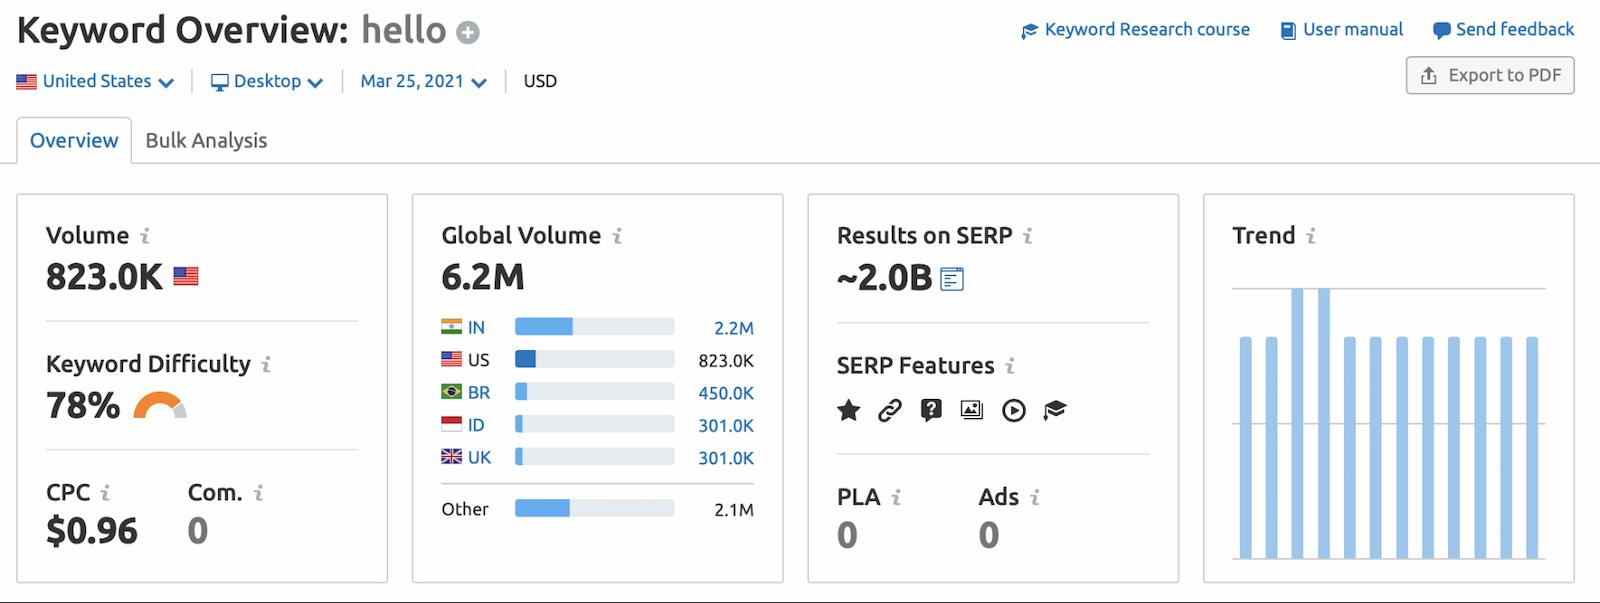 Semrush present search volume, keyword difficulty, and various other data points for each keyword